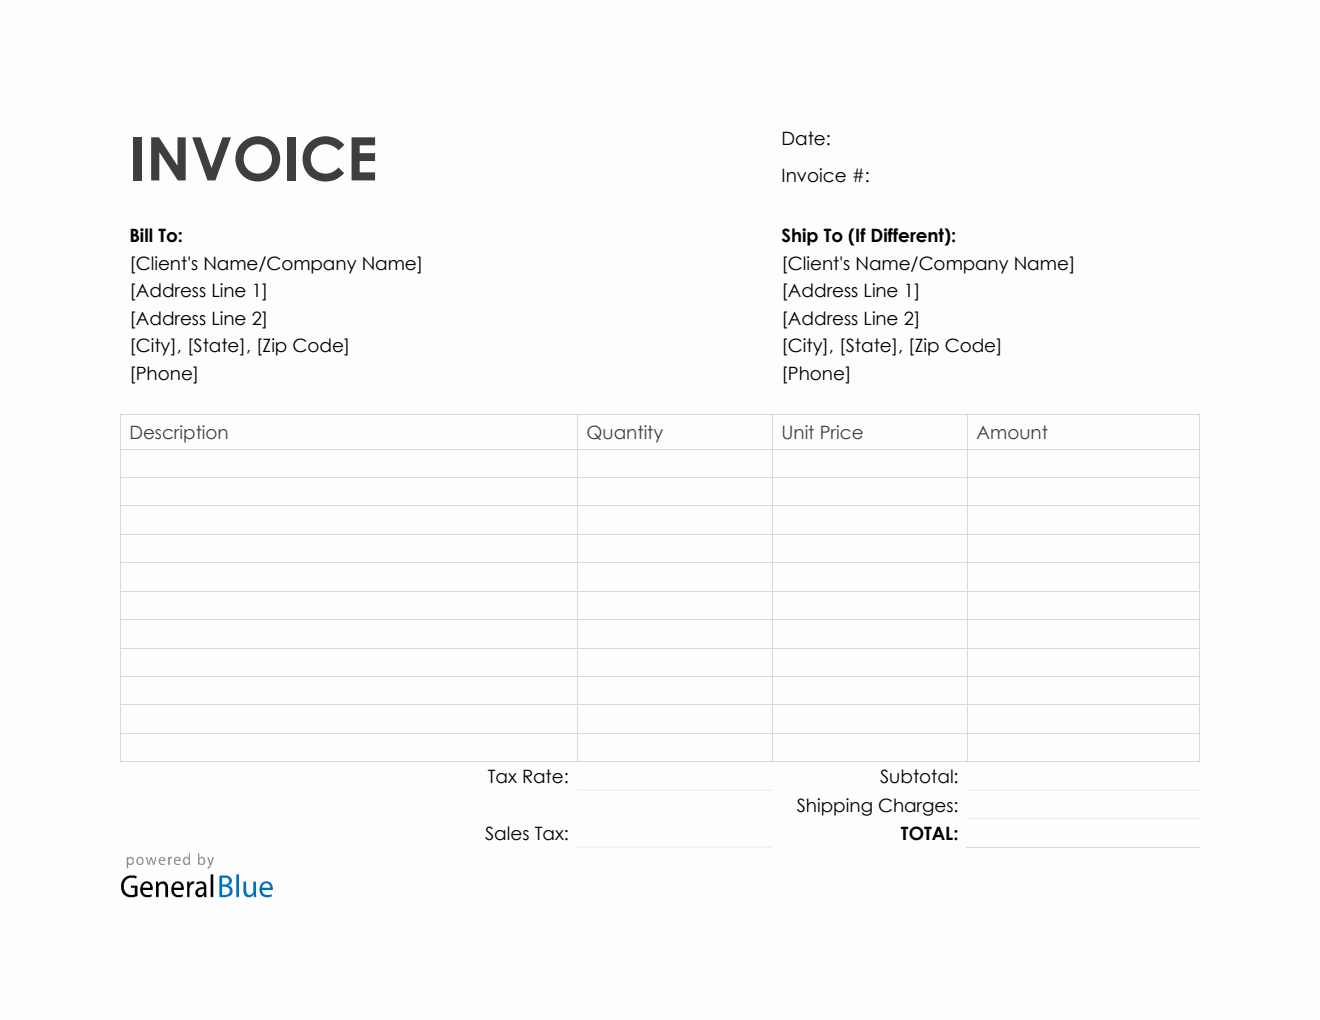 Purchase Invoice in Word (Simple)